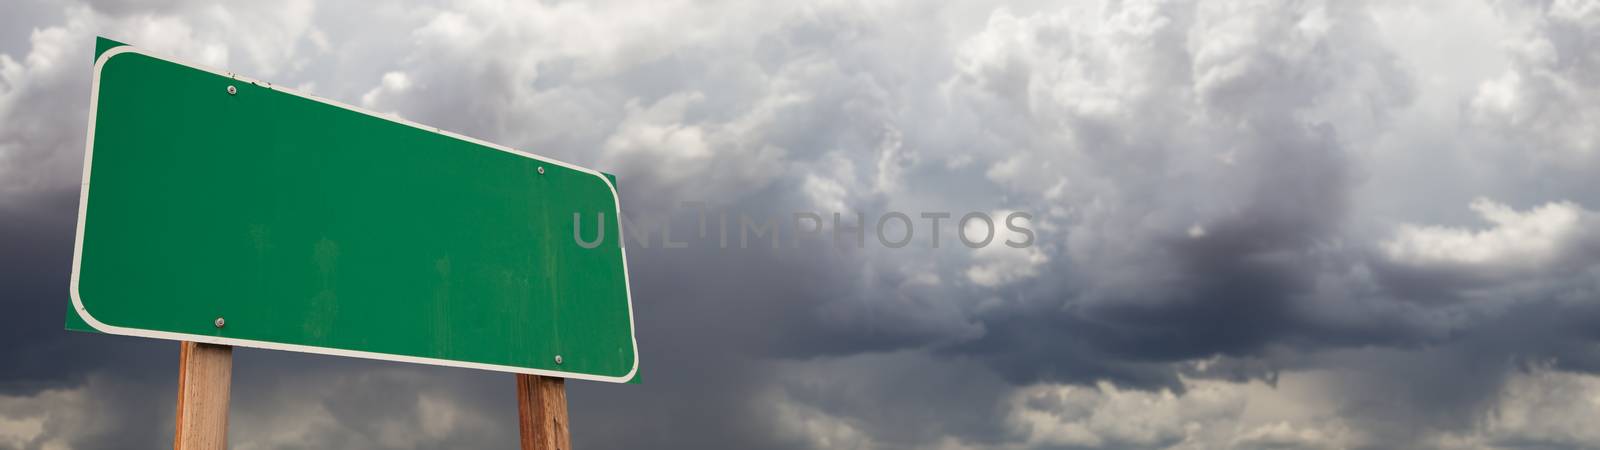 Blank Green Road Sign Against Ominous Cloudy Stormy Sky Background Banner.